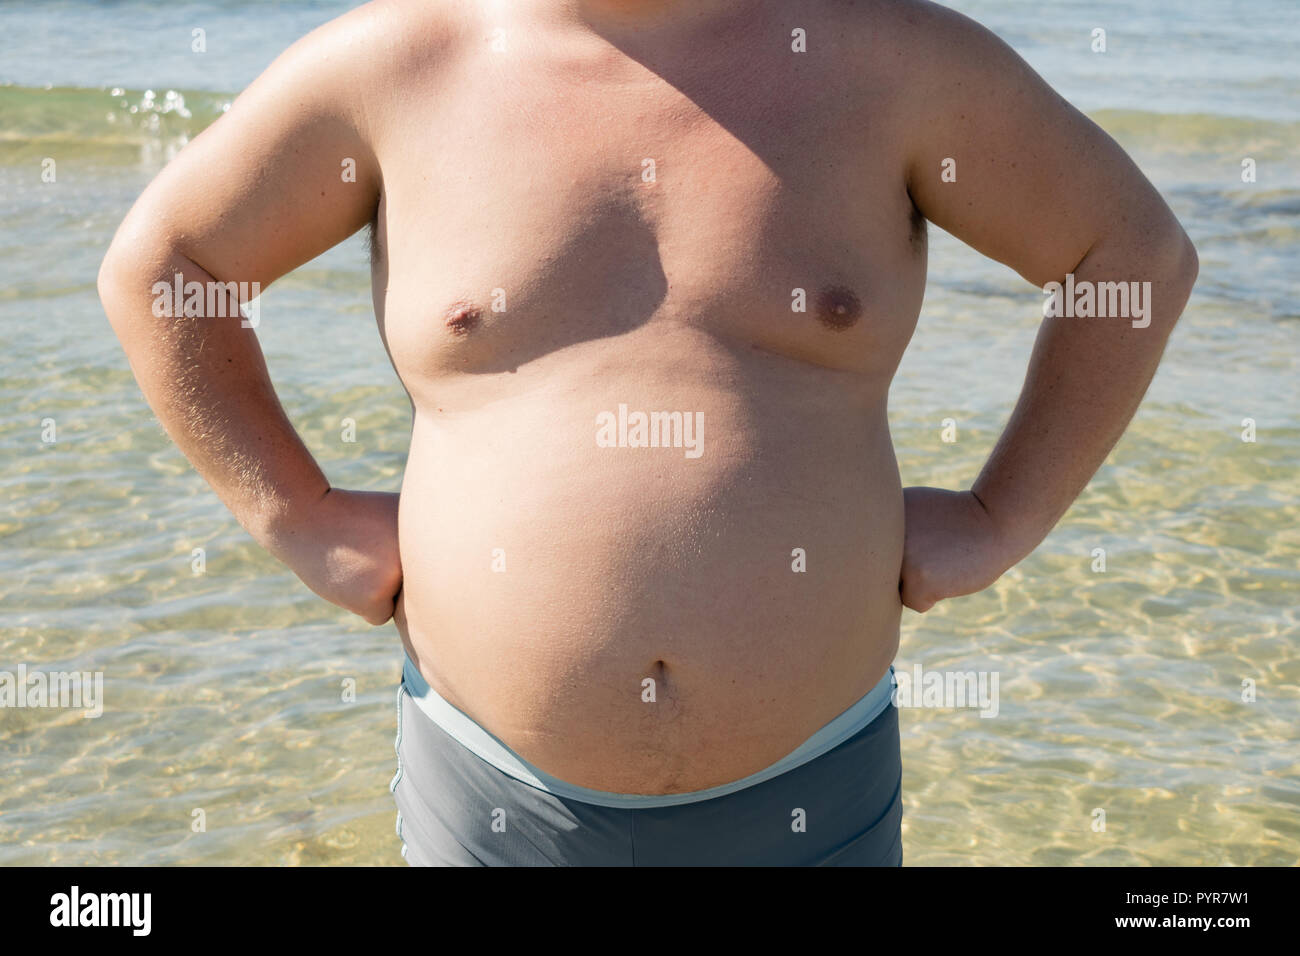 a-fat-man-in-shorts-stands-on-the-shore-of-the-sea-sun-and-vacation-PYR7W1.jpg